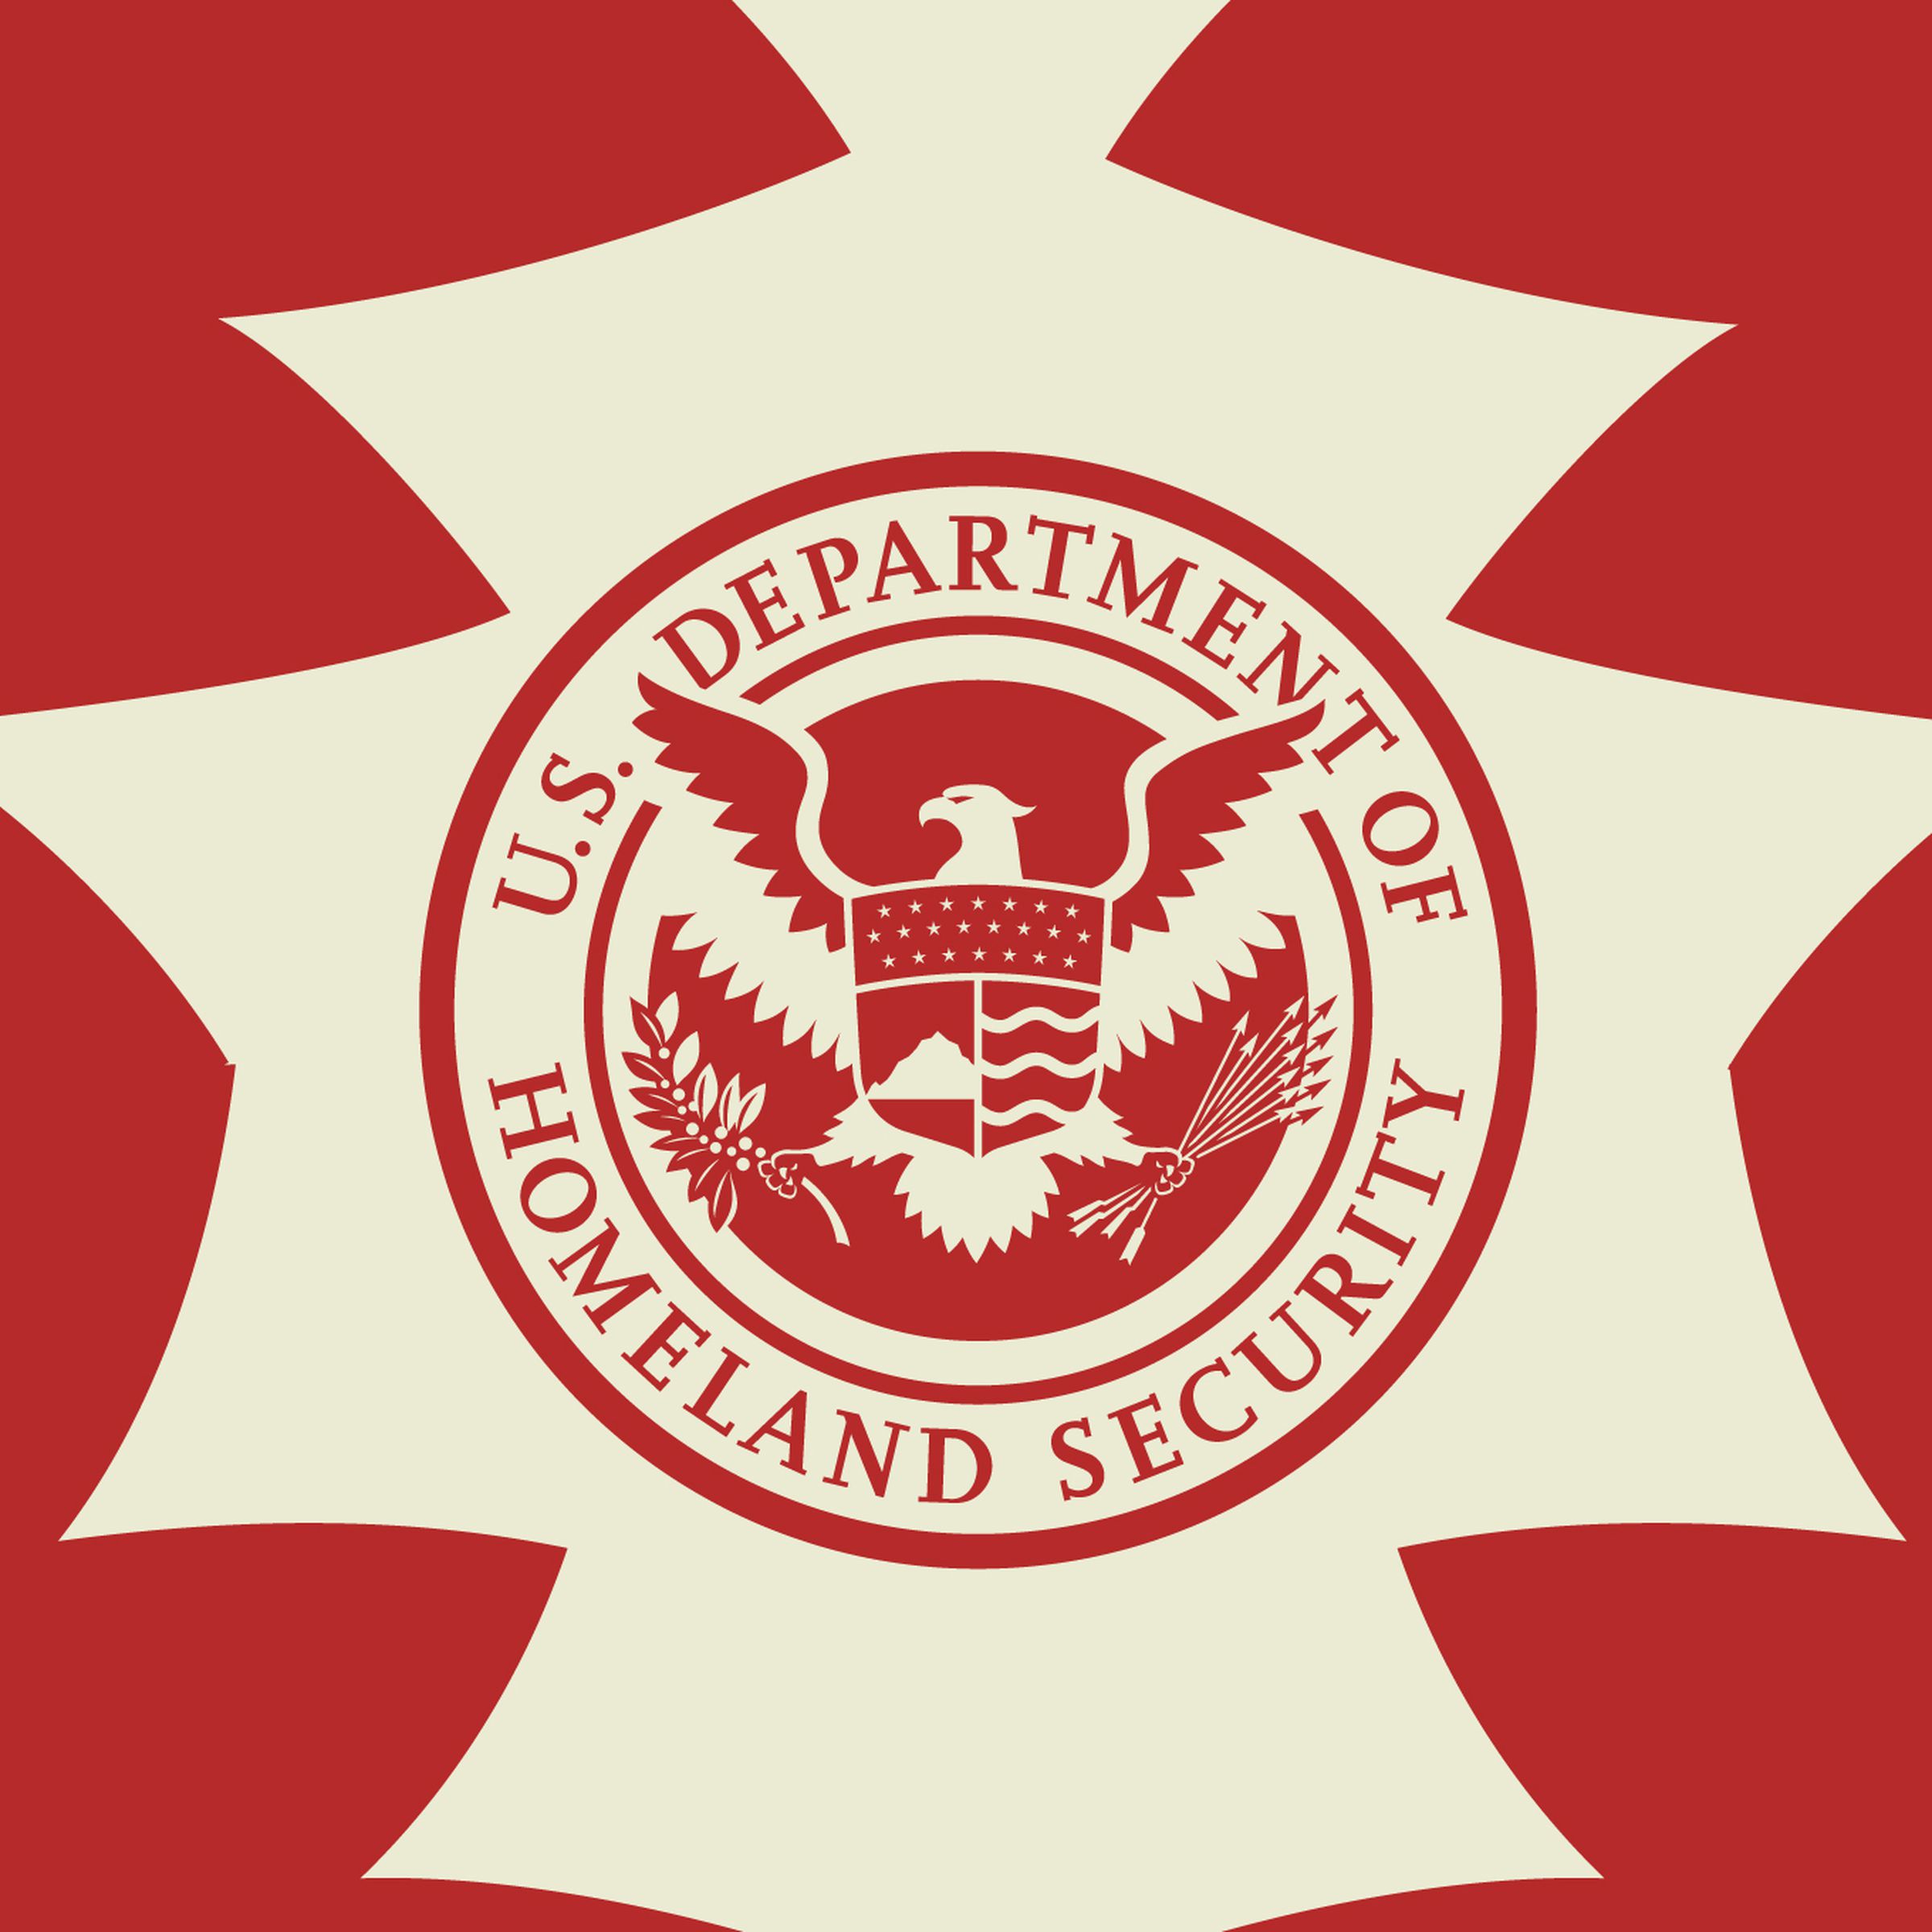 Illustration of the seal for the US Department of Homeland Security on a red and tan background.